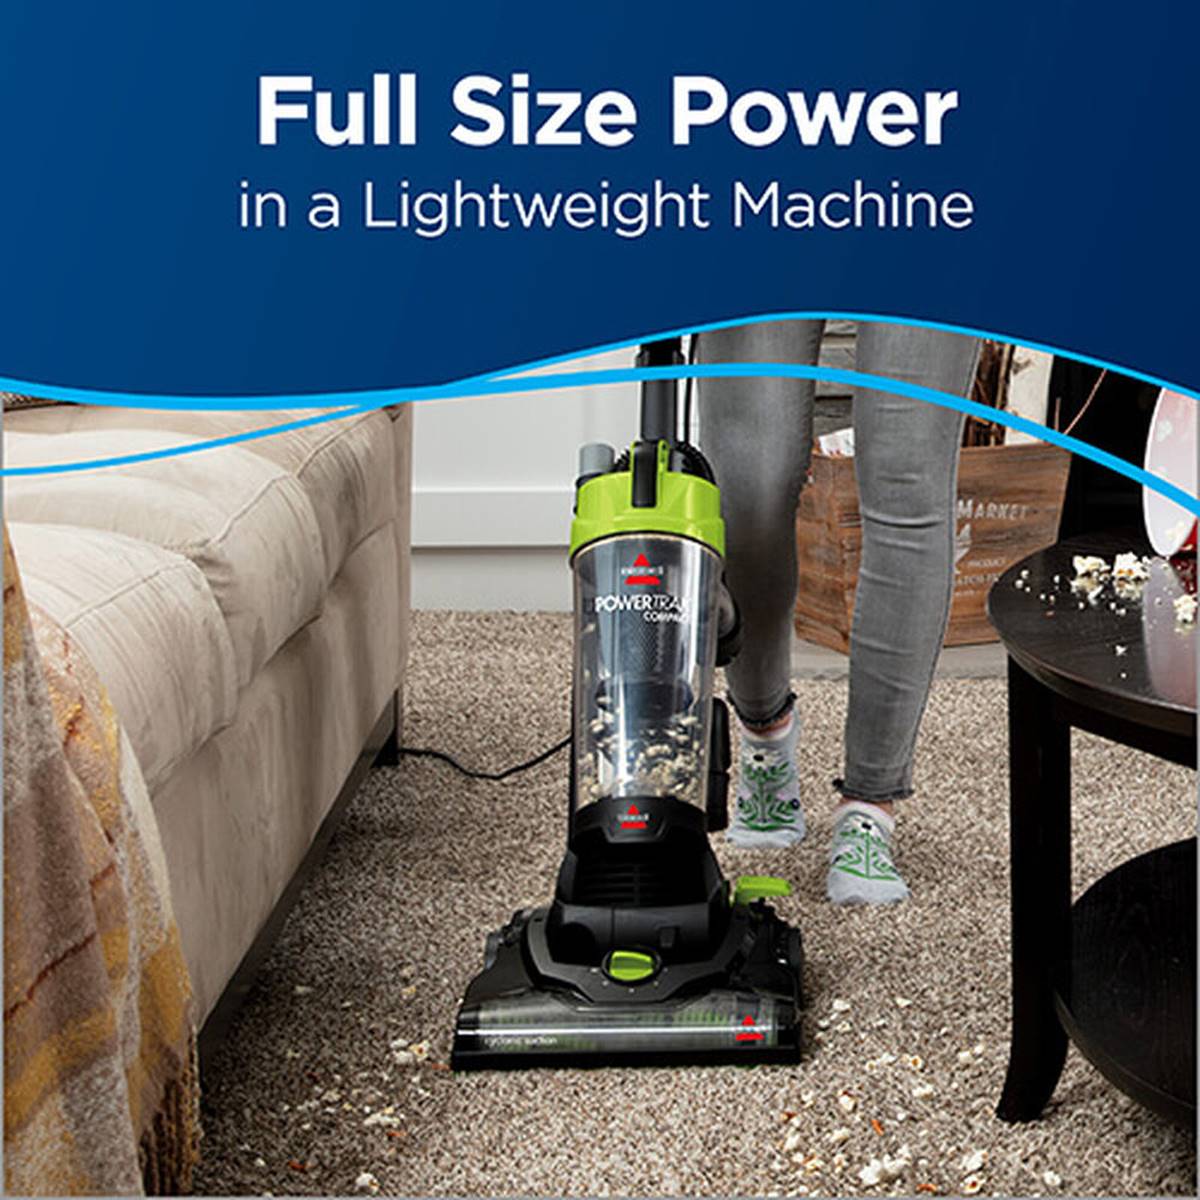 Bissell(R) PowerTrak(R) Compact Upright Vacuum